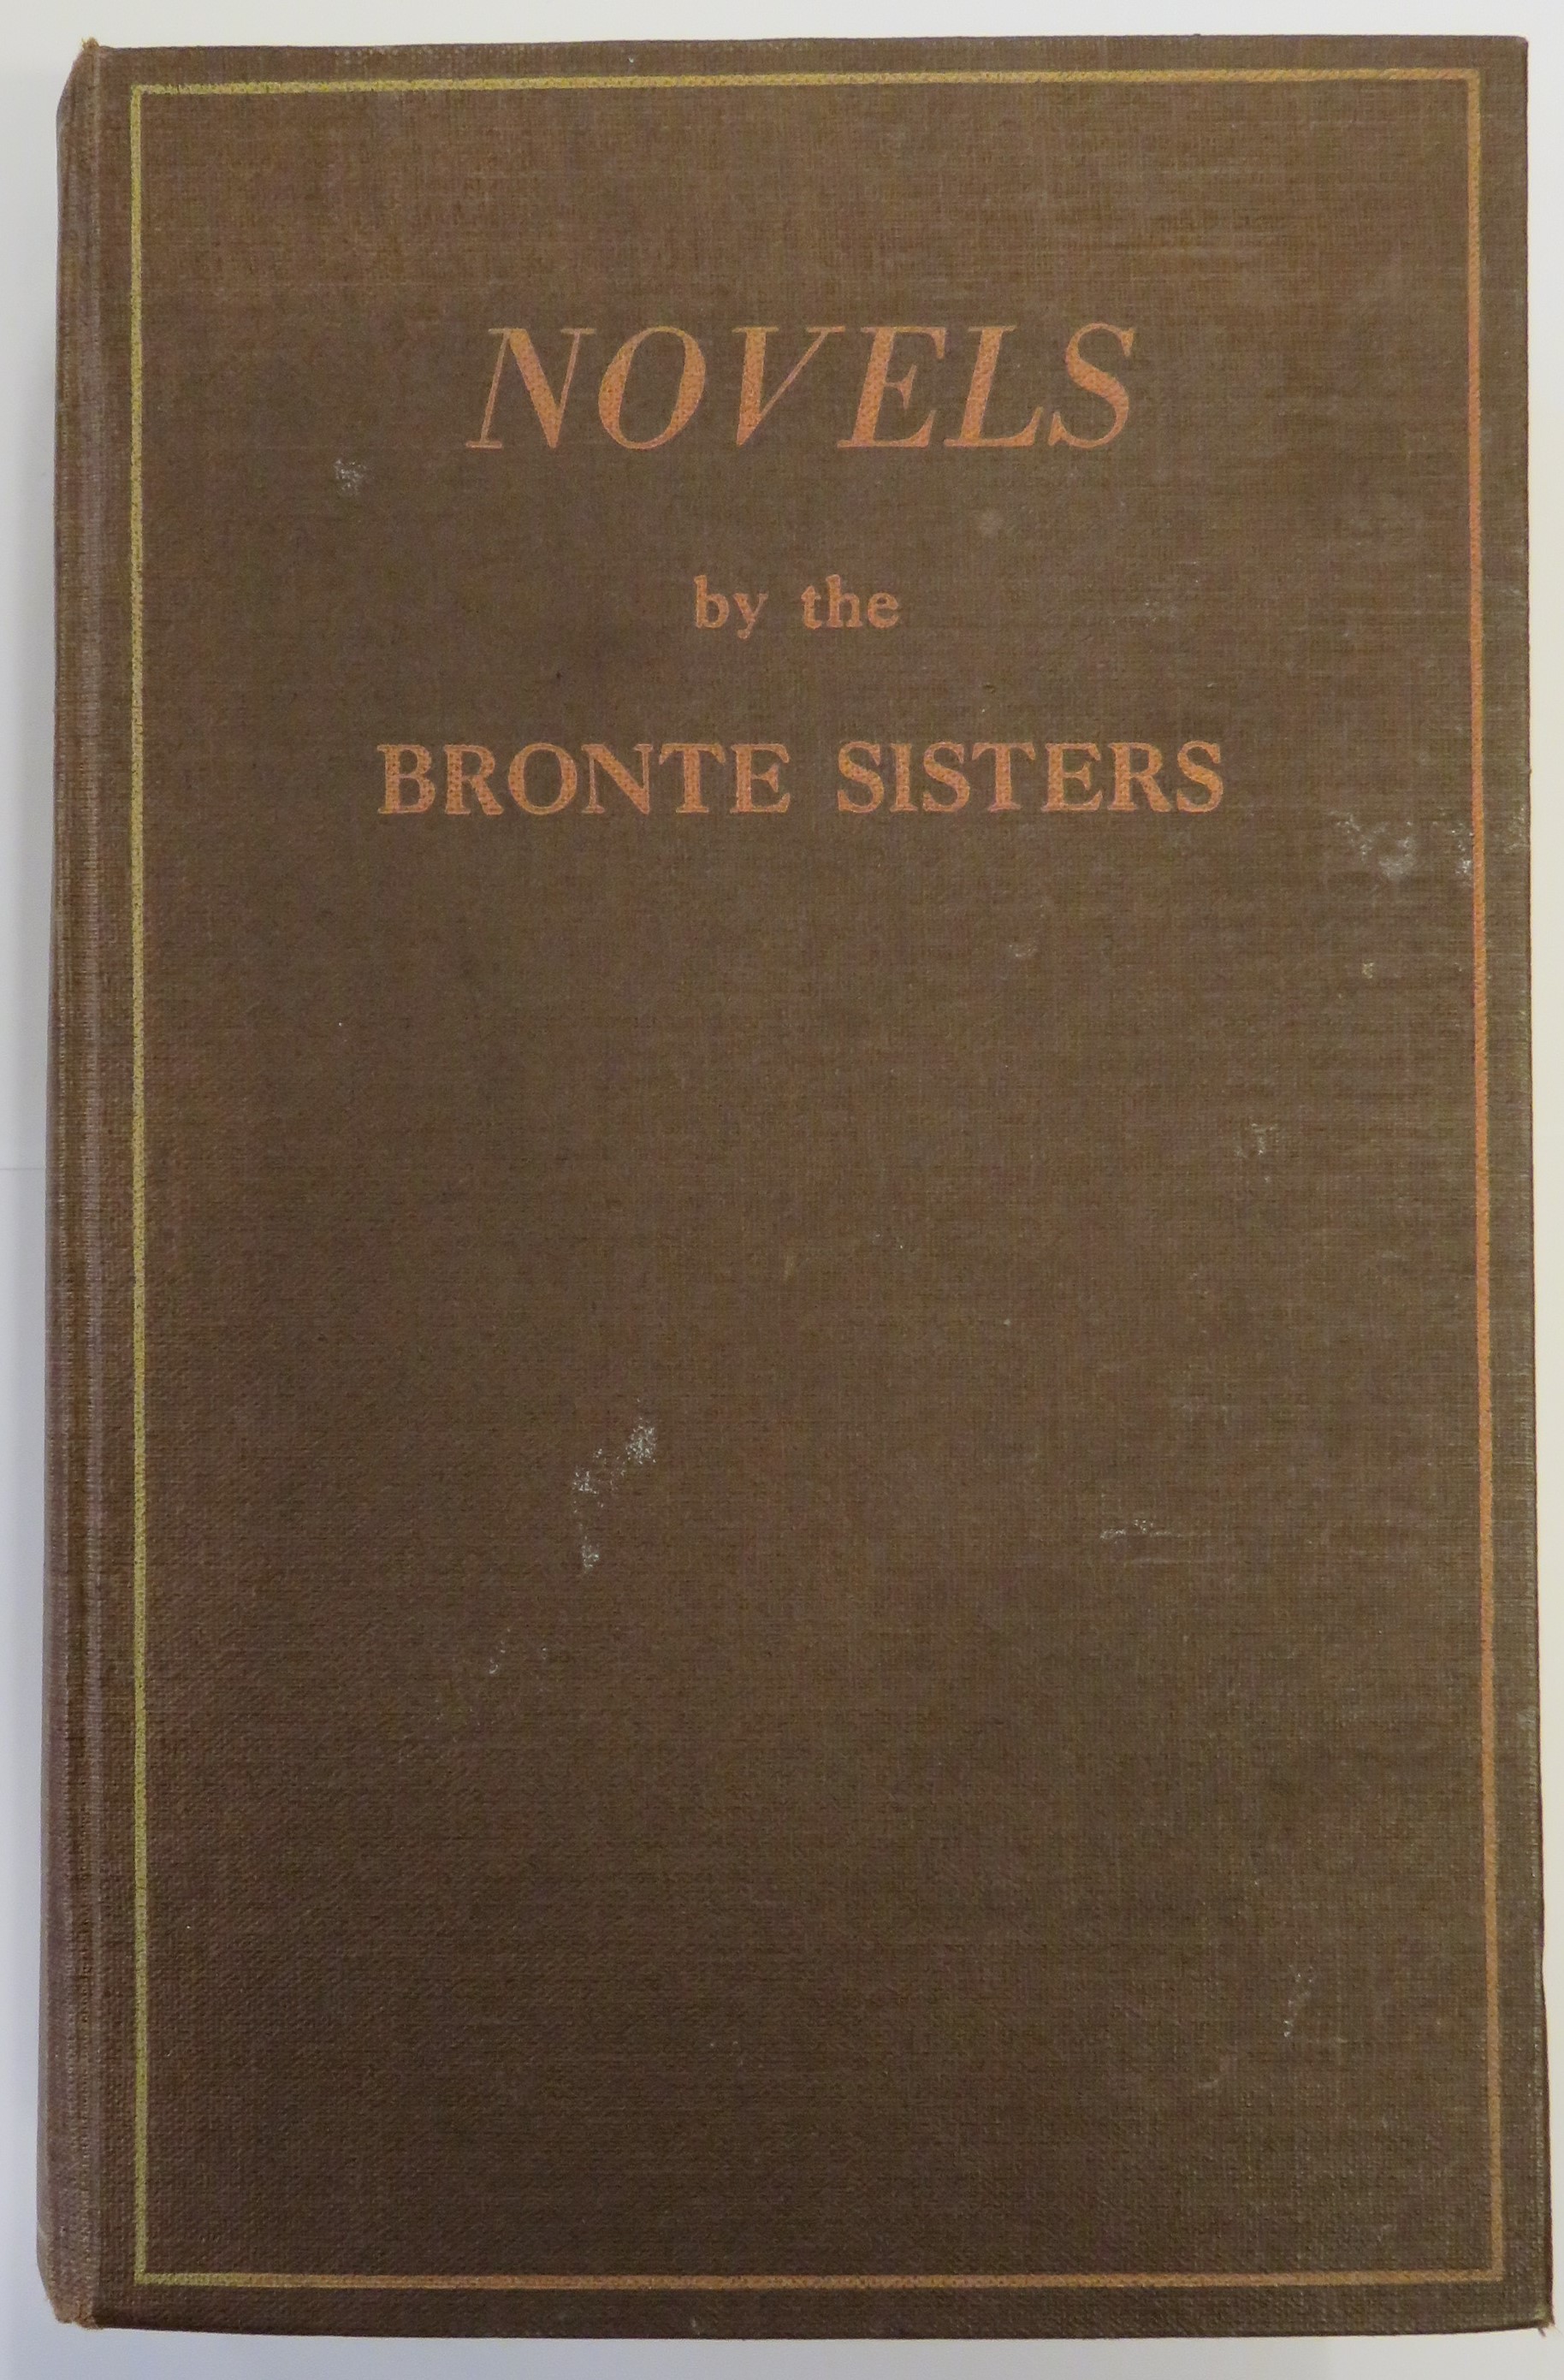 Novels by the Bronte Sisters